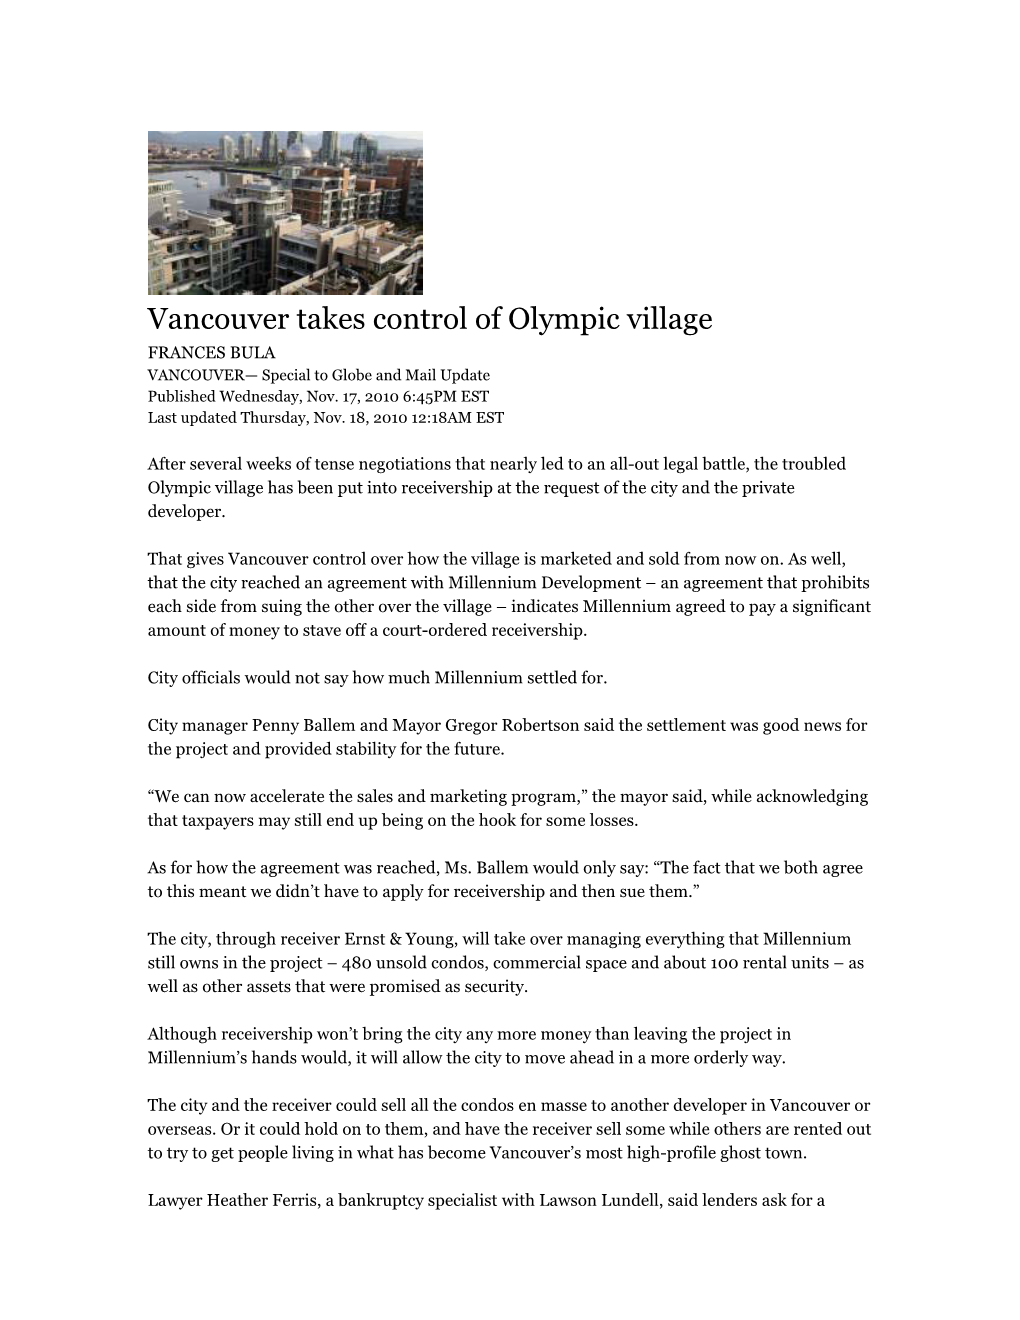 Vancouver Takes Control of Olympic Village FRANCES BULA VANCOUVER— Special to Globe and Mail Update Published Wednesday, Nov